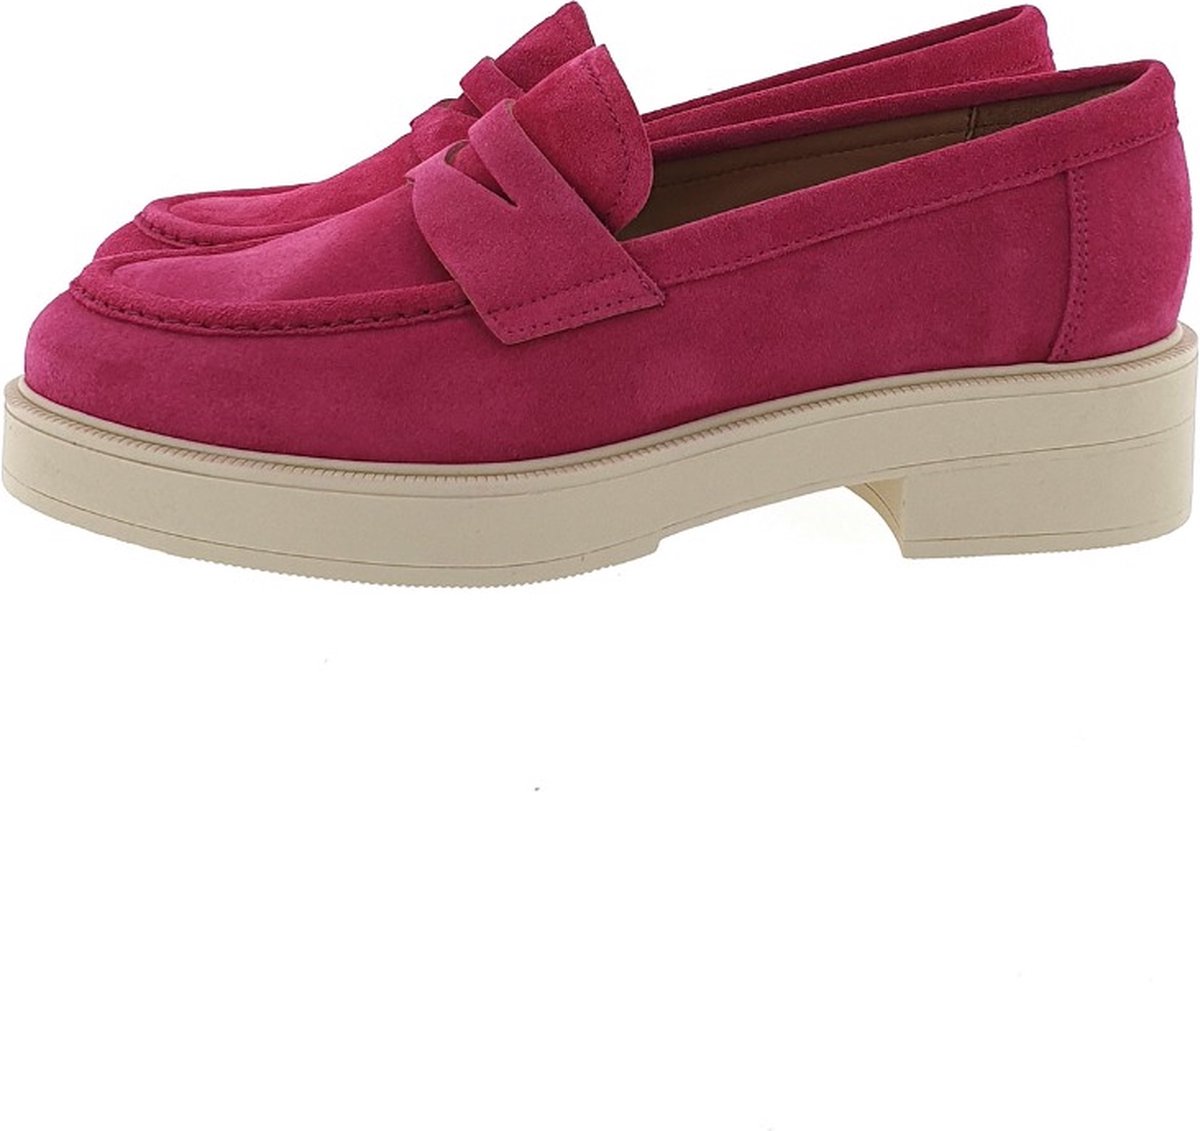 CTWLK London loafer fuxia, 37 / 4